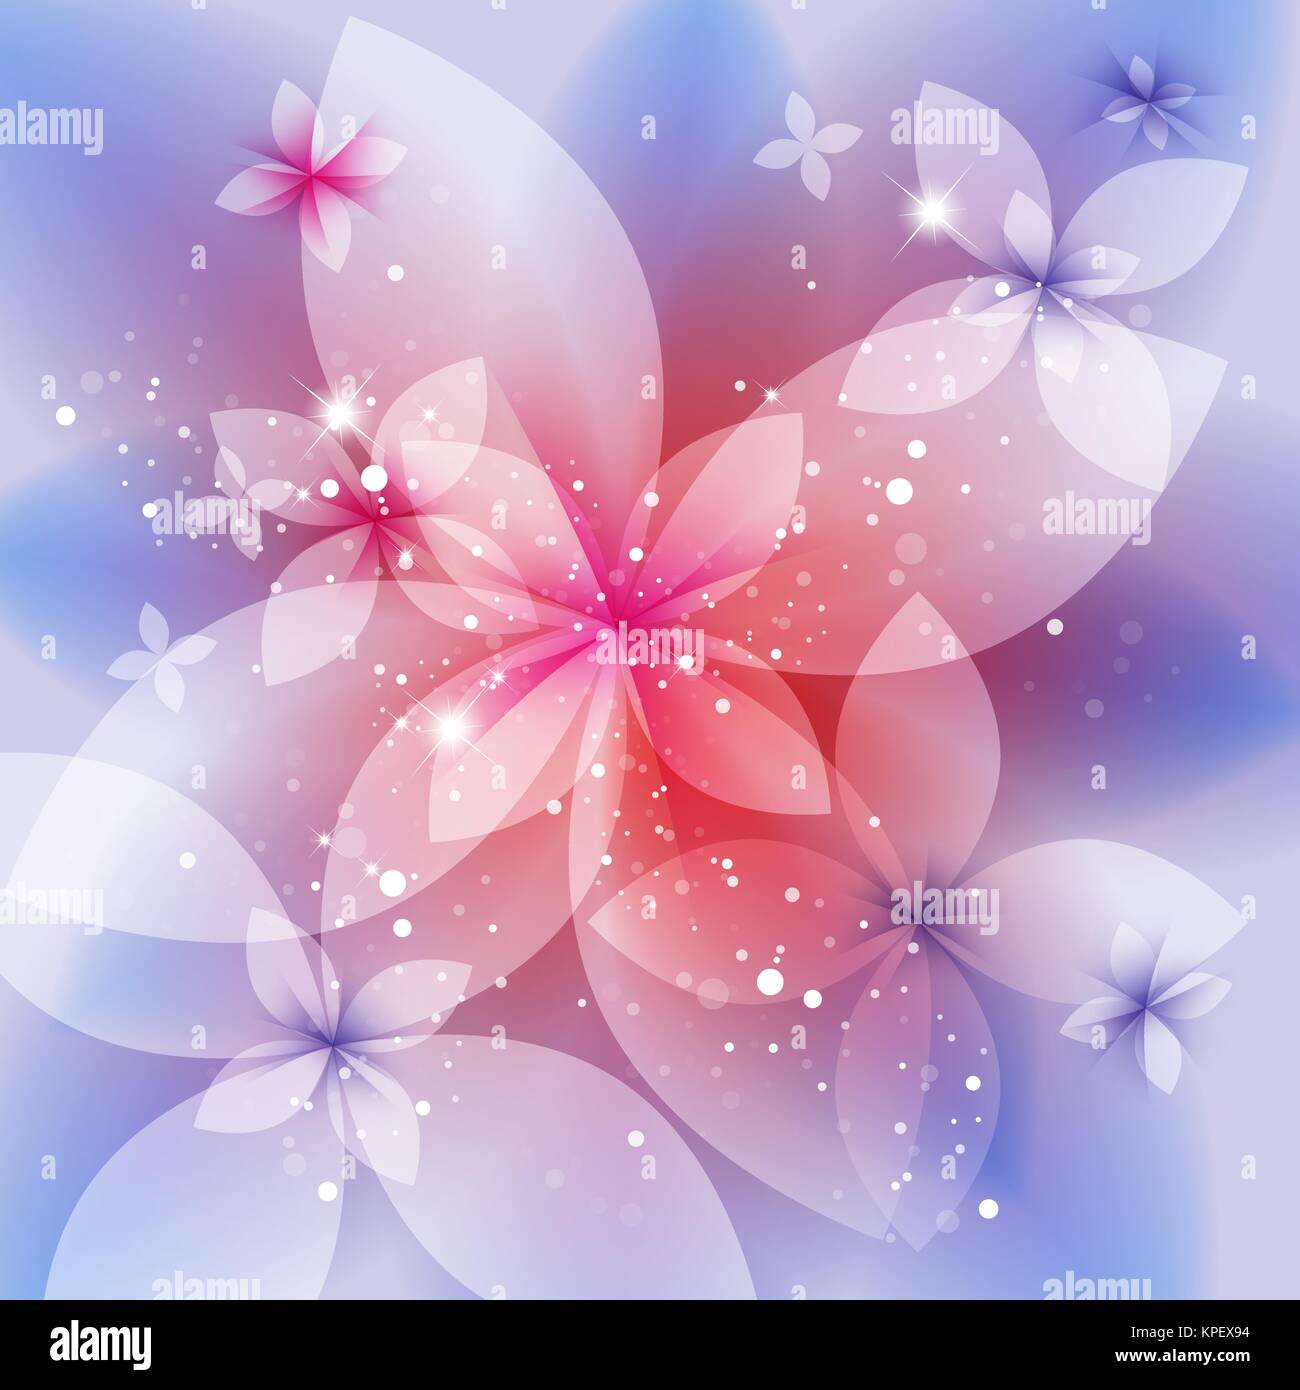 festive floral background, abstract illustration Stock Vector